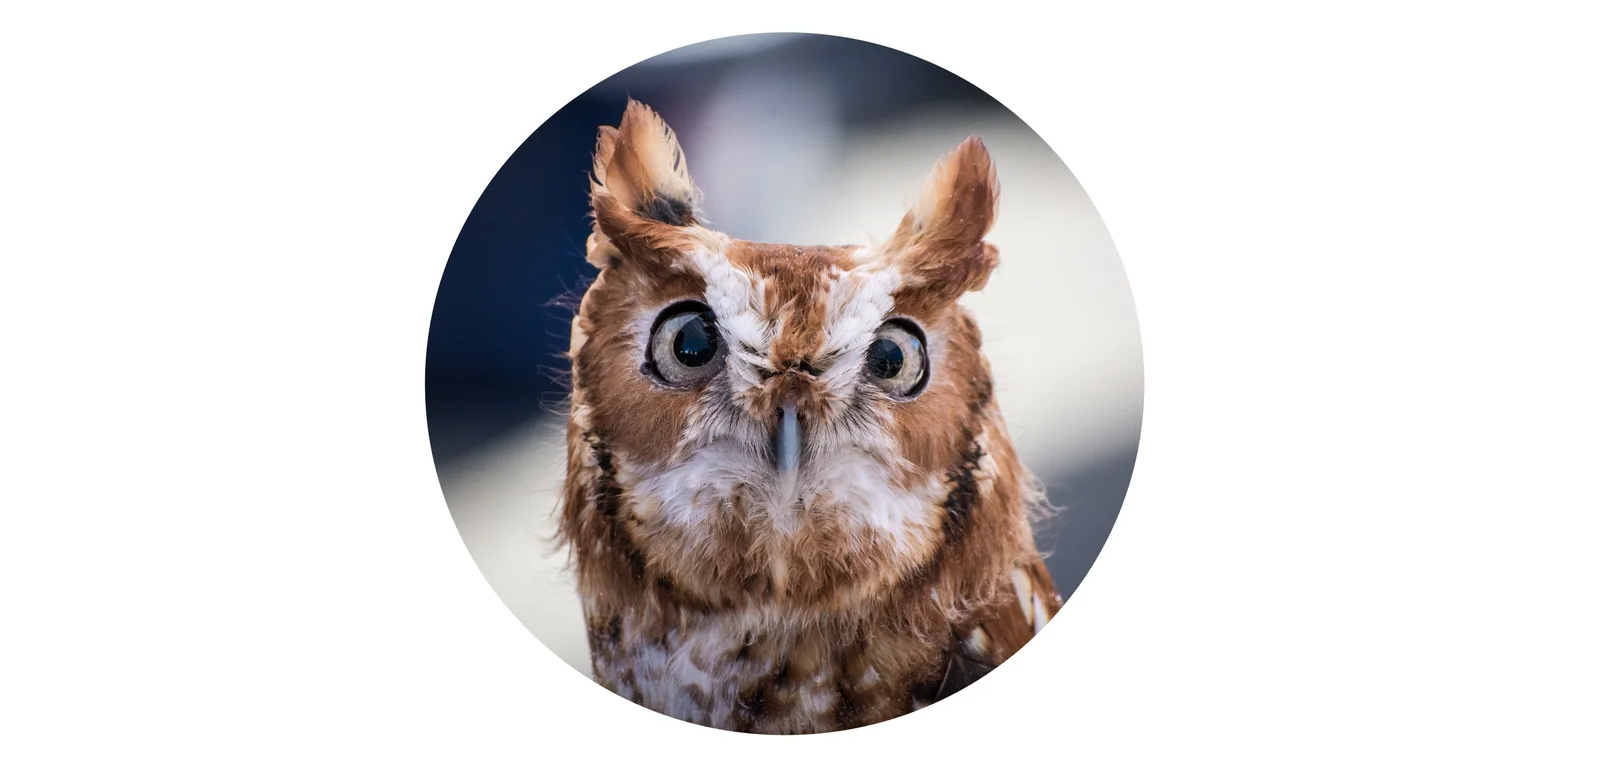 What Does a Screech Owl Sound Like